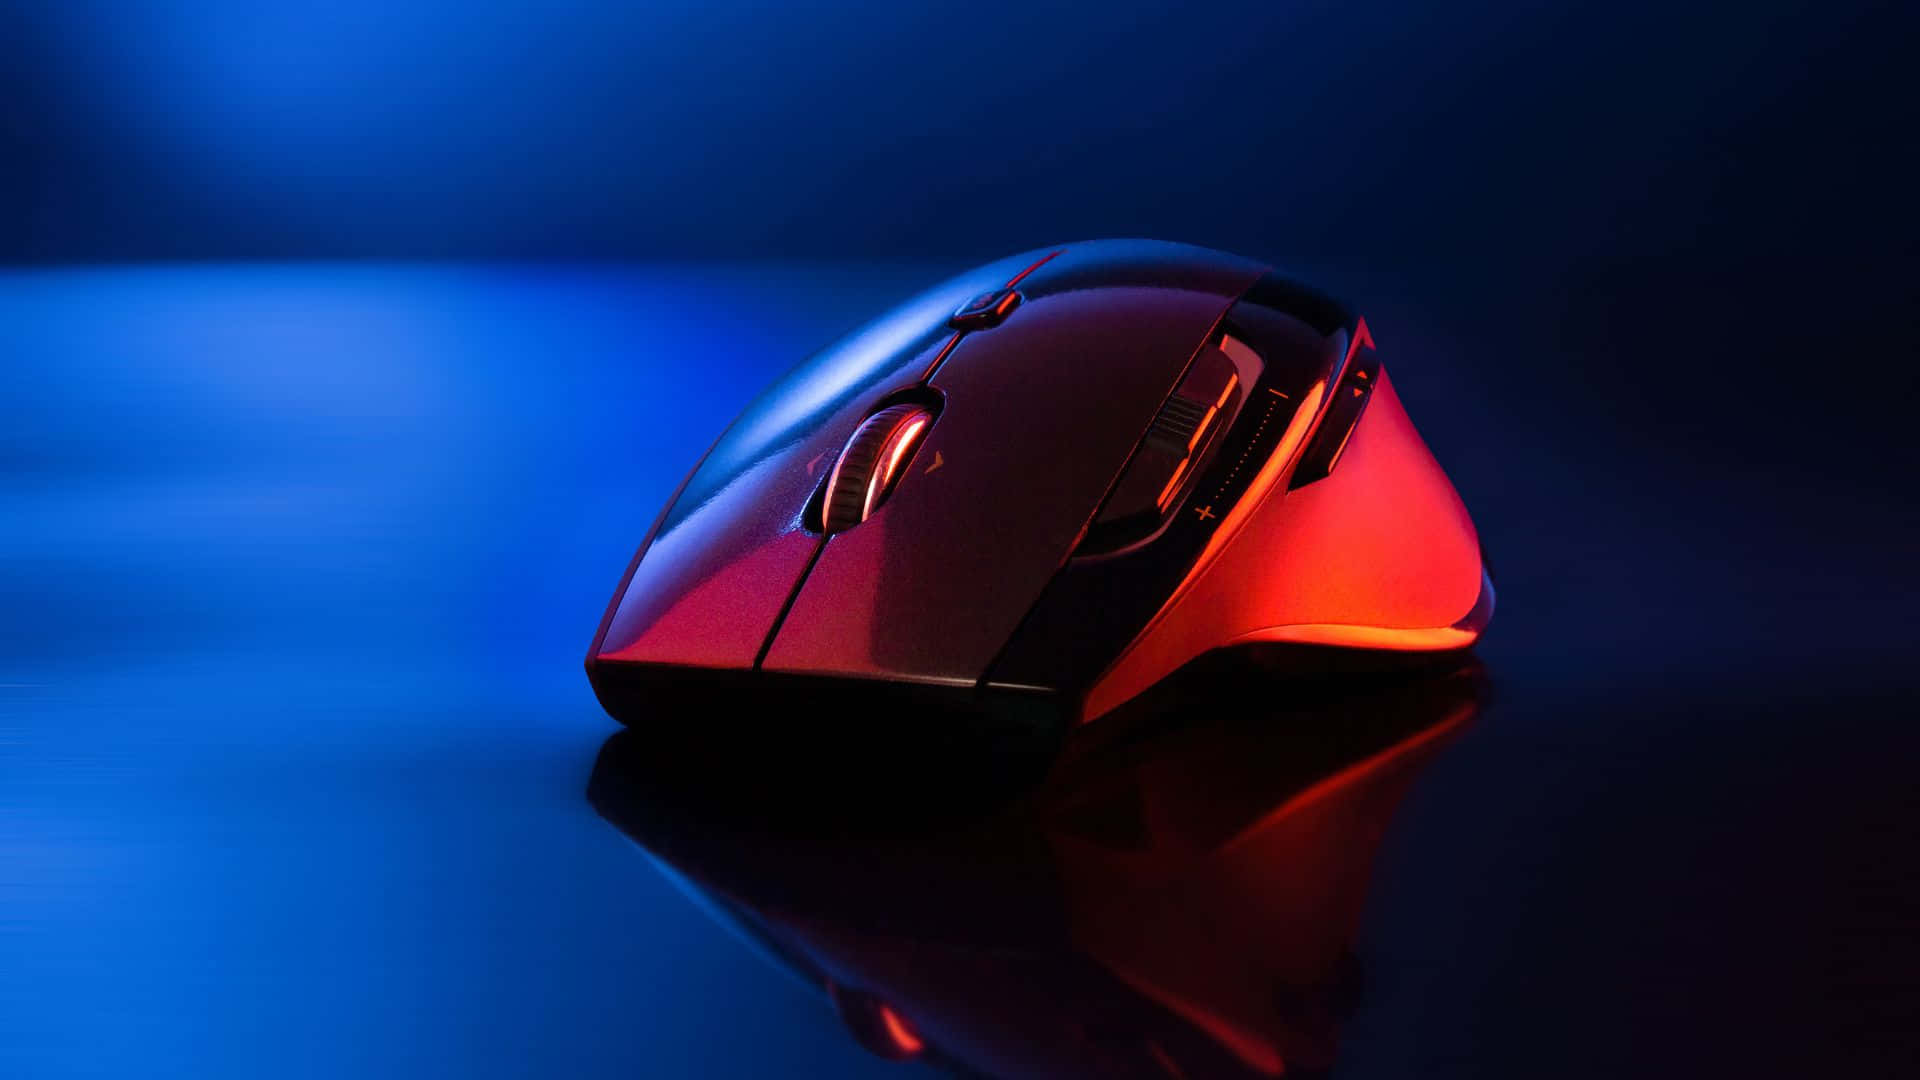 There's nothing like the responsive, accurate feedback of the latest gaming mice Wallpaper